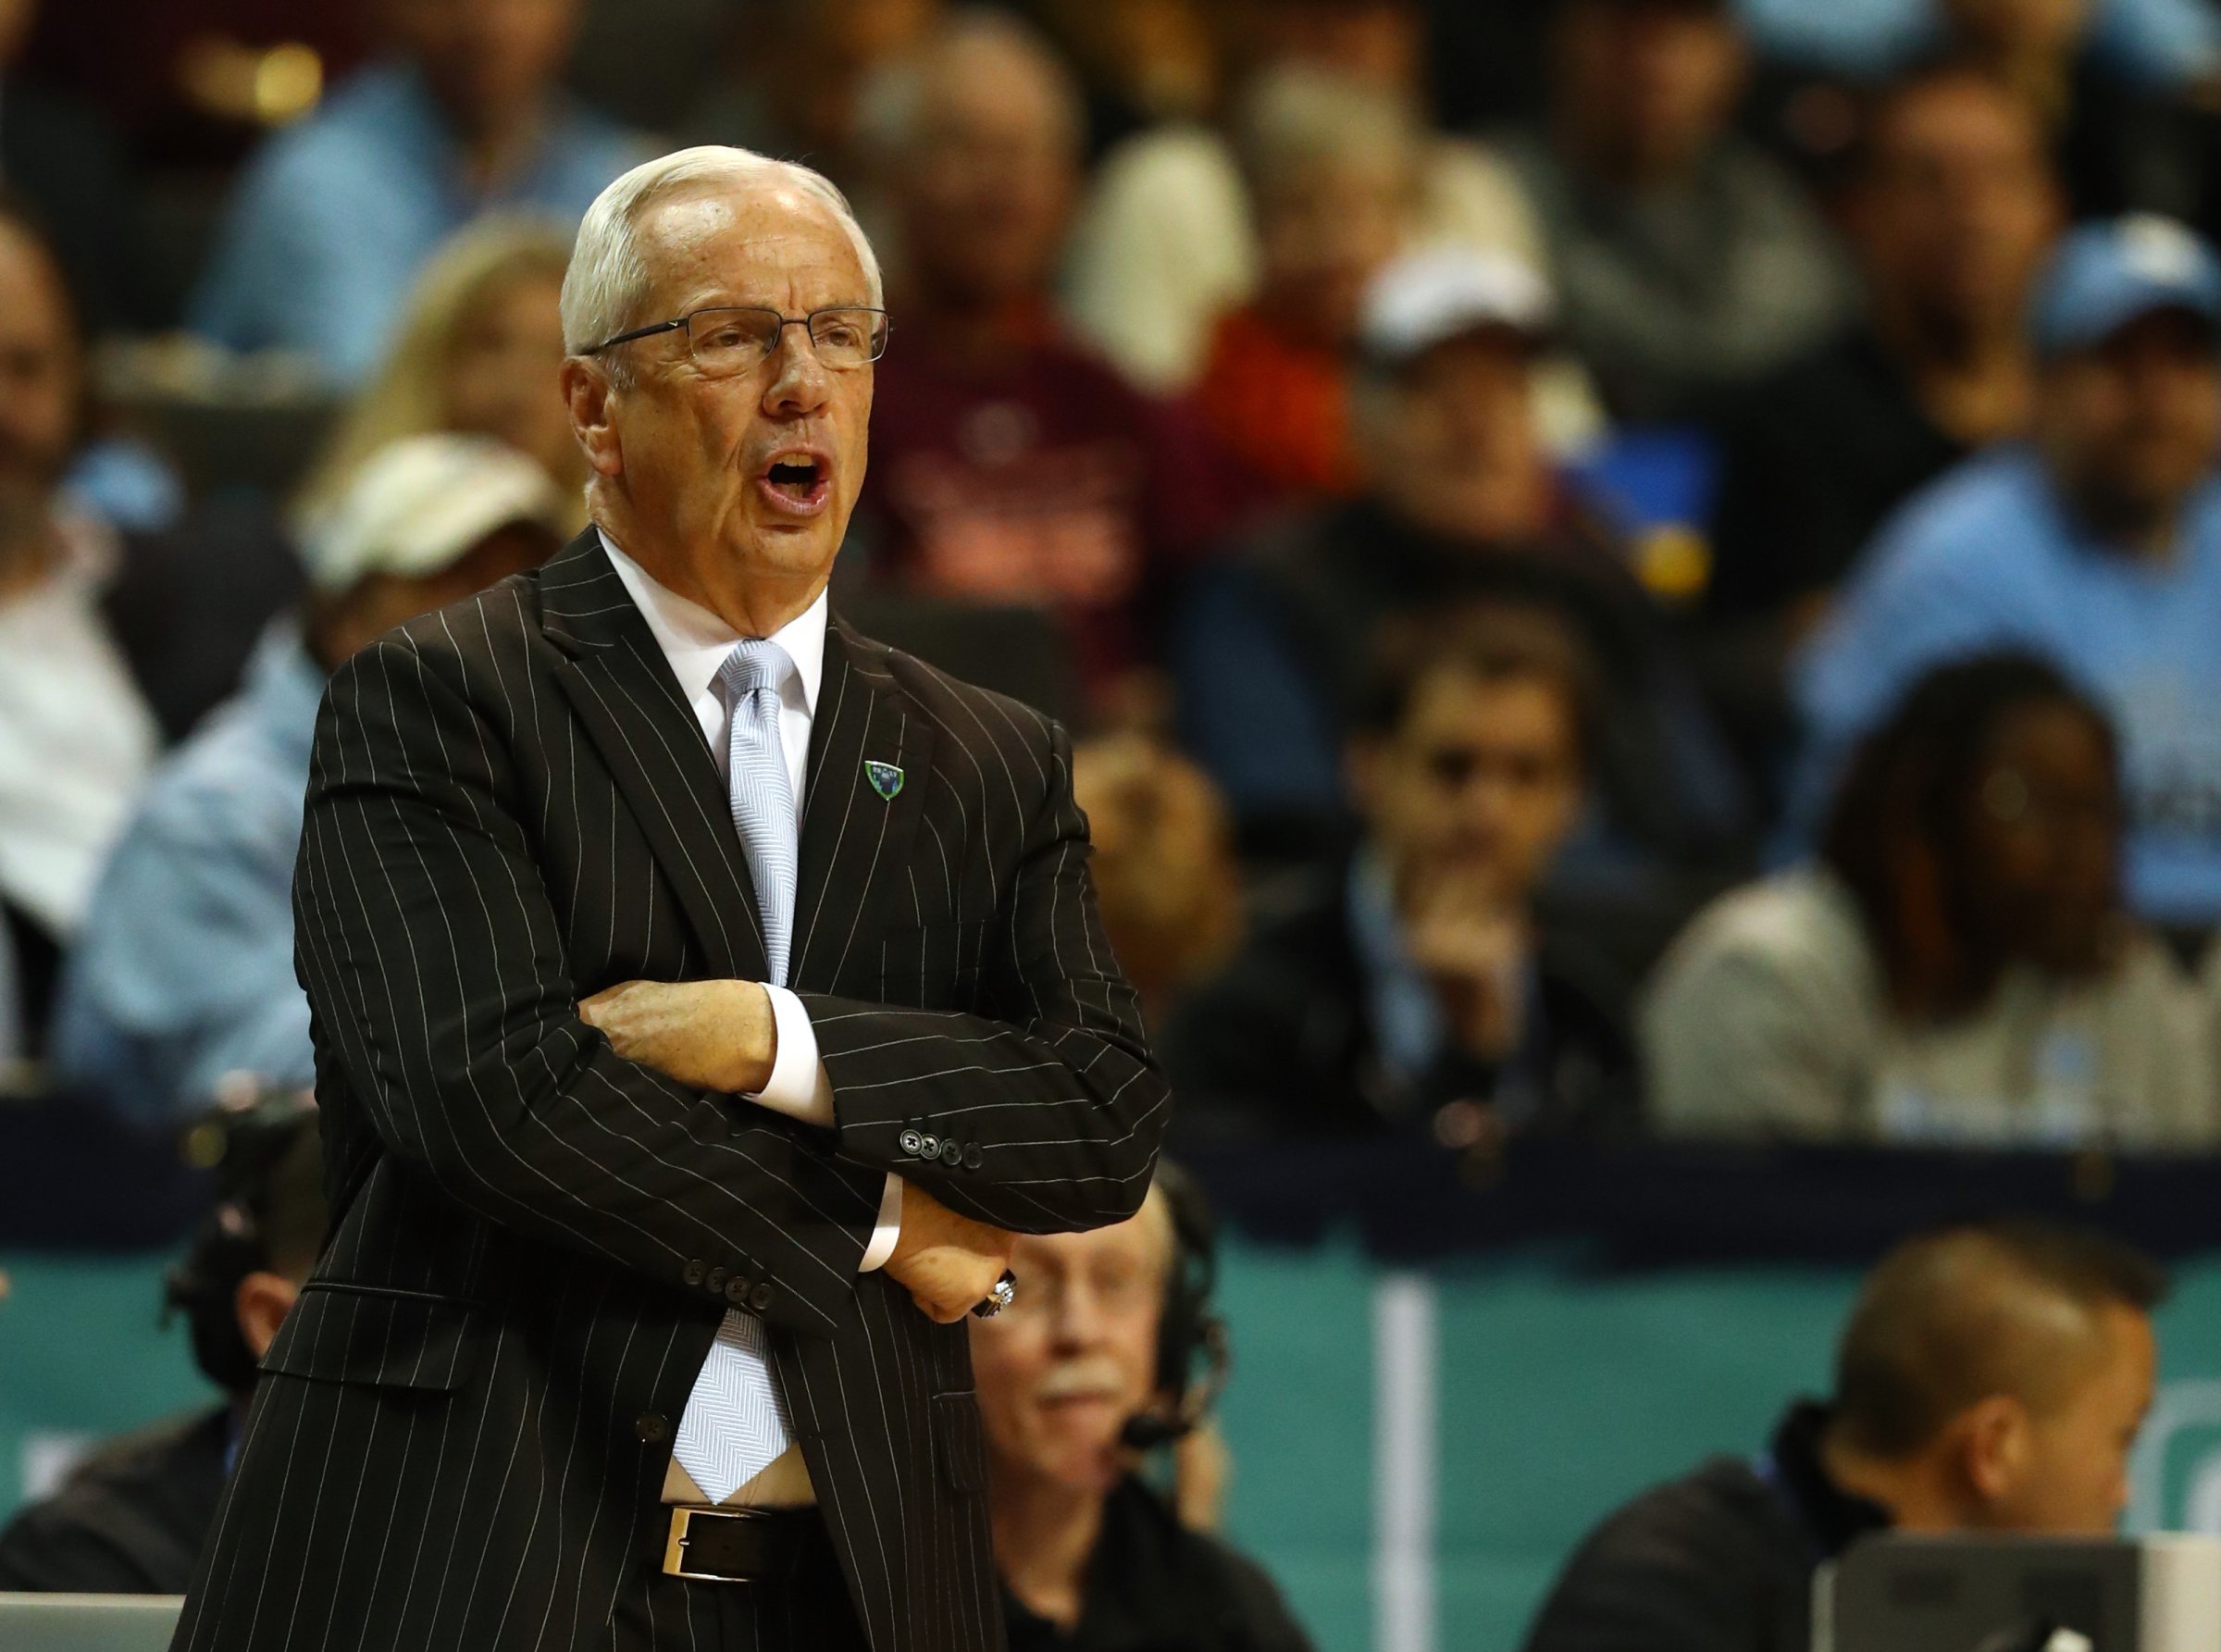 Head coach Roy Williams of the North Carolina Tar Heels in action against the Miami (Fl) Hurricanes during the Quarterfinals of the ACC Basketball Tournament at the Barclays Center on March 9, 2017 in New York City.